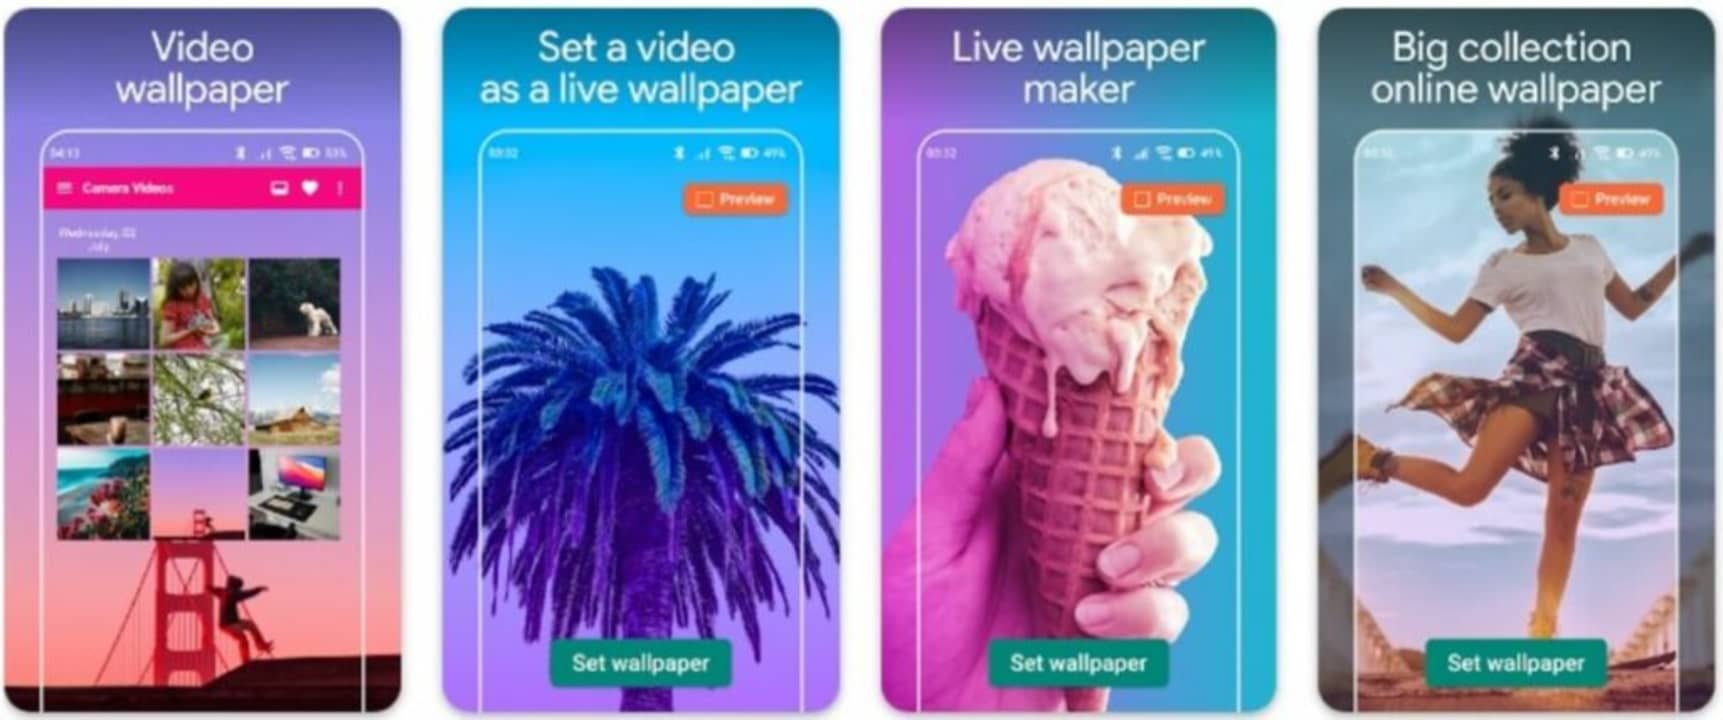 Android live wallpaper maker features